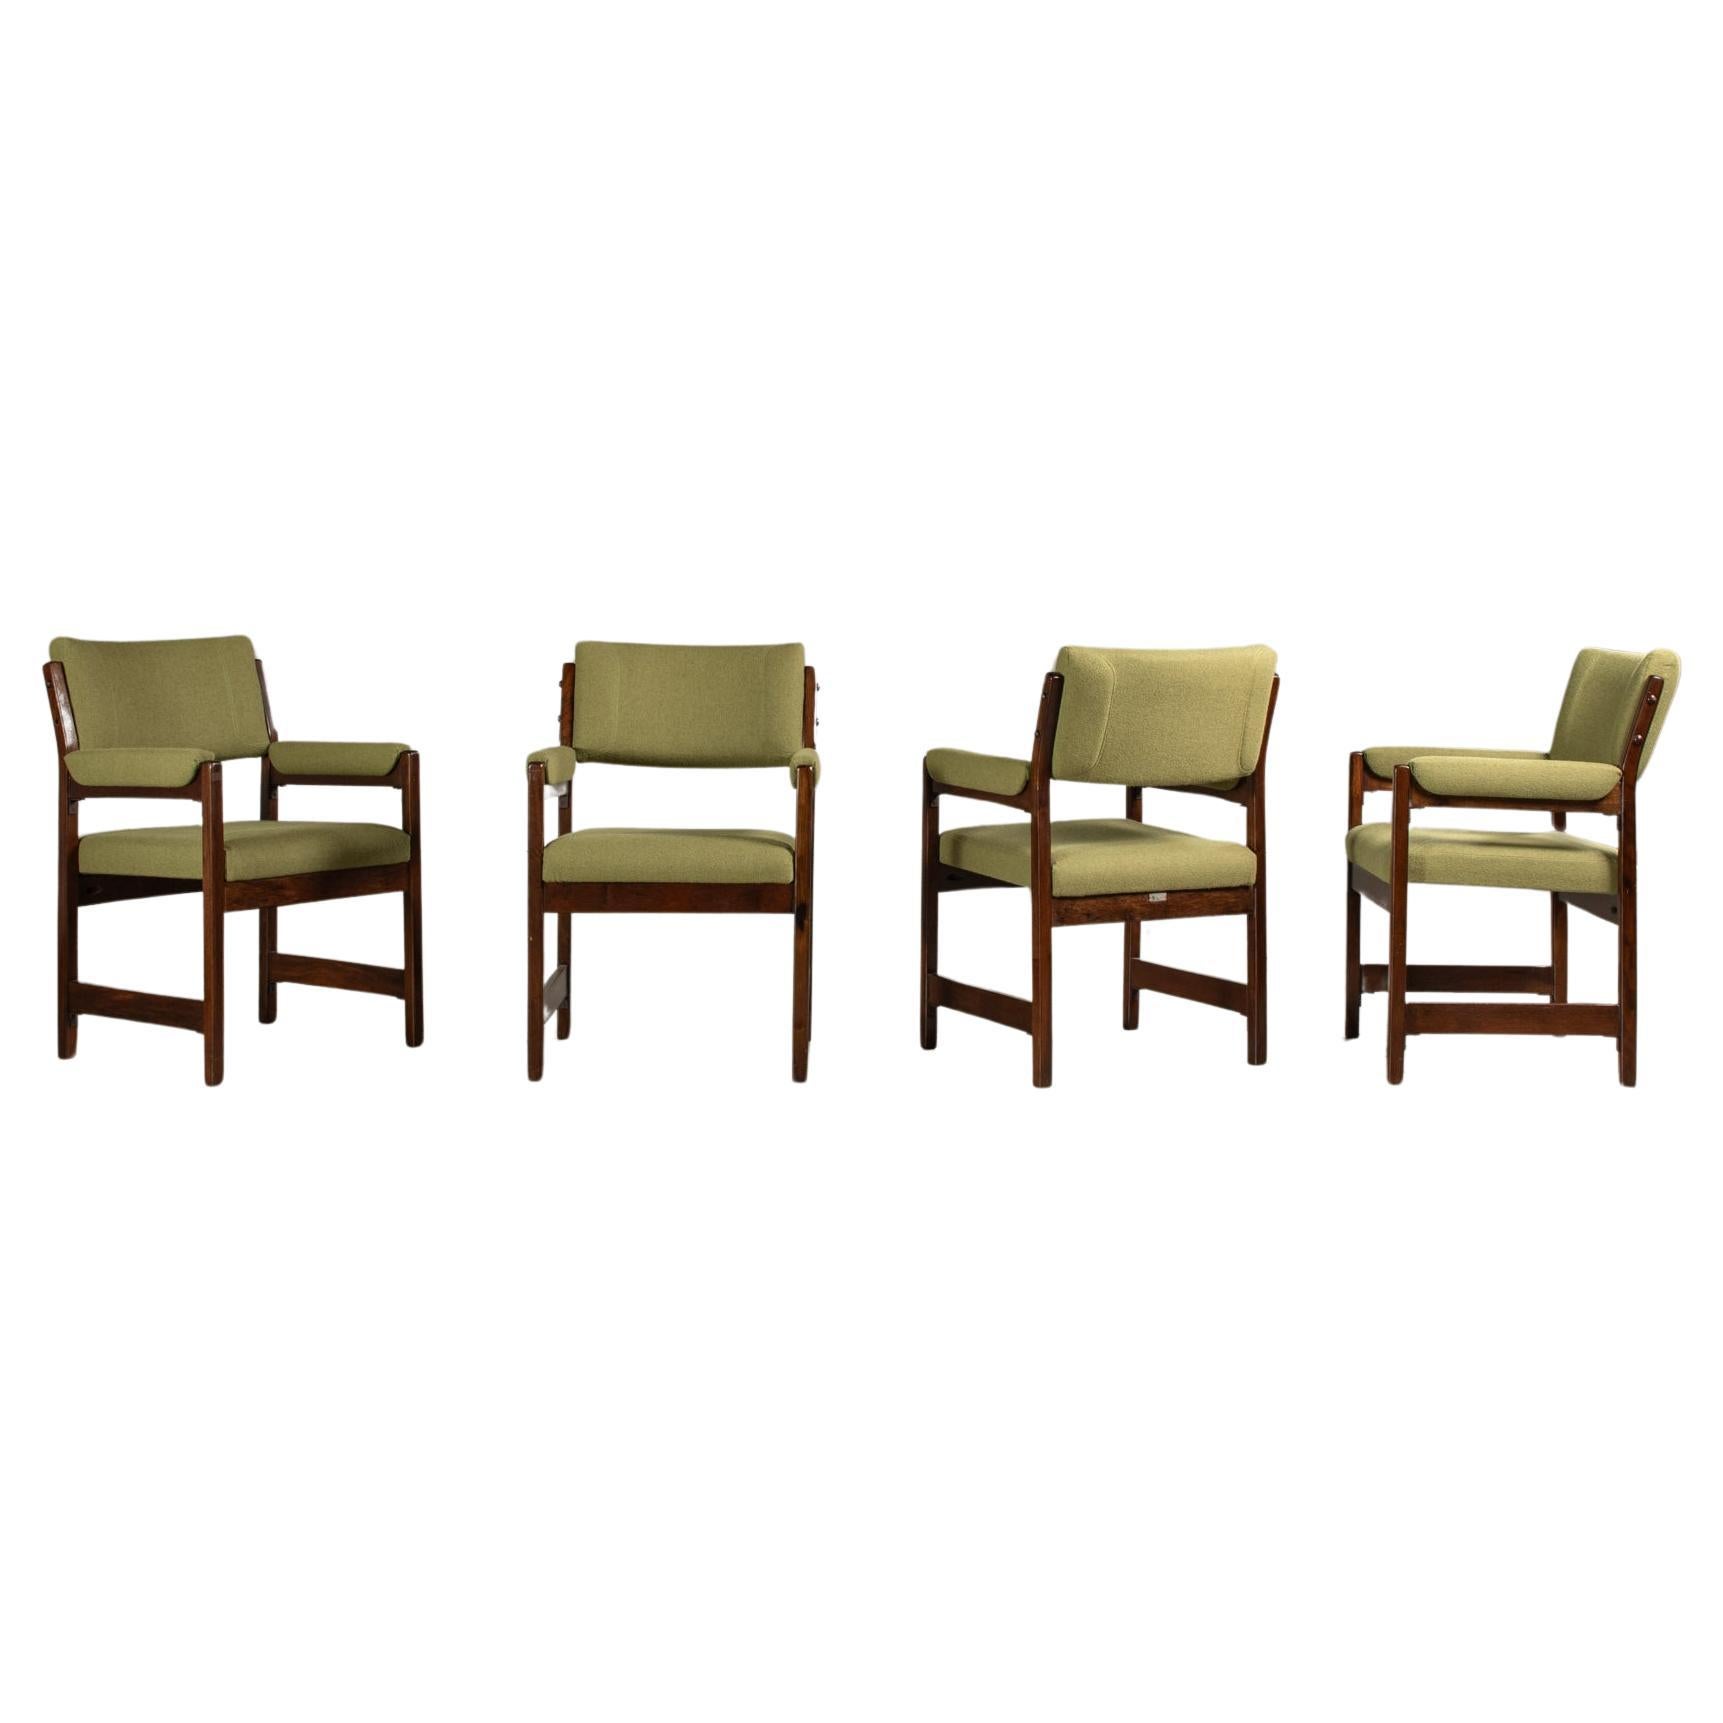 Set of Chairs in Solid Hardwood and Green Fabric, Brazilian Mid-Century Modern For Sale